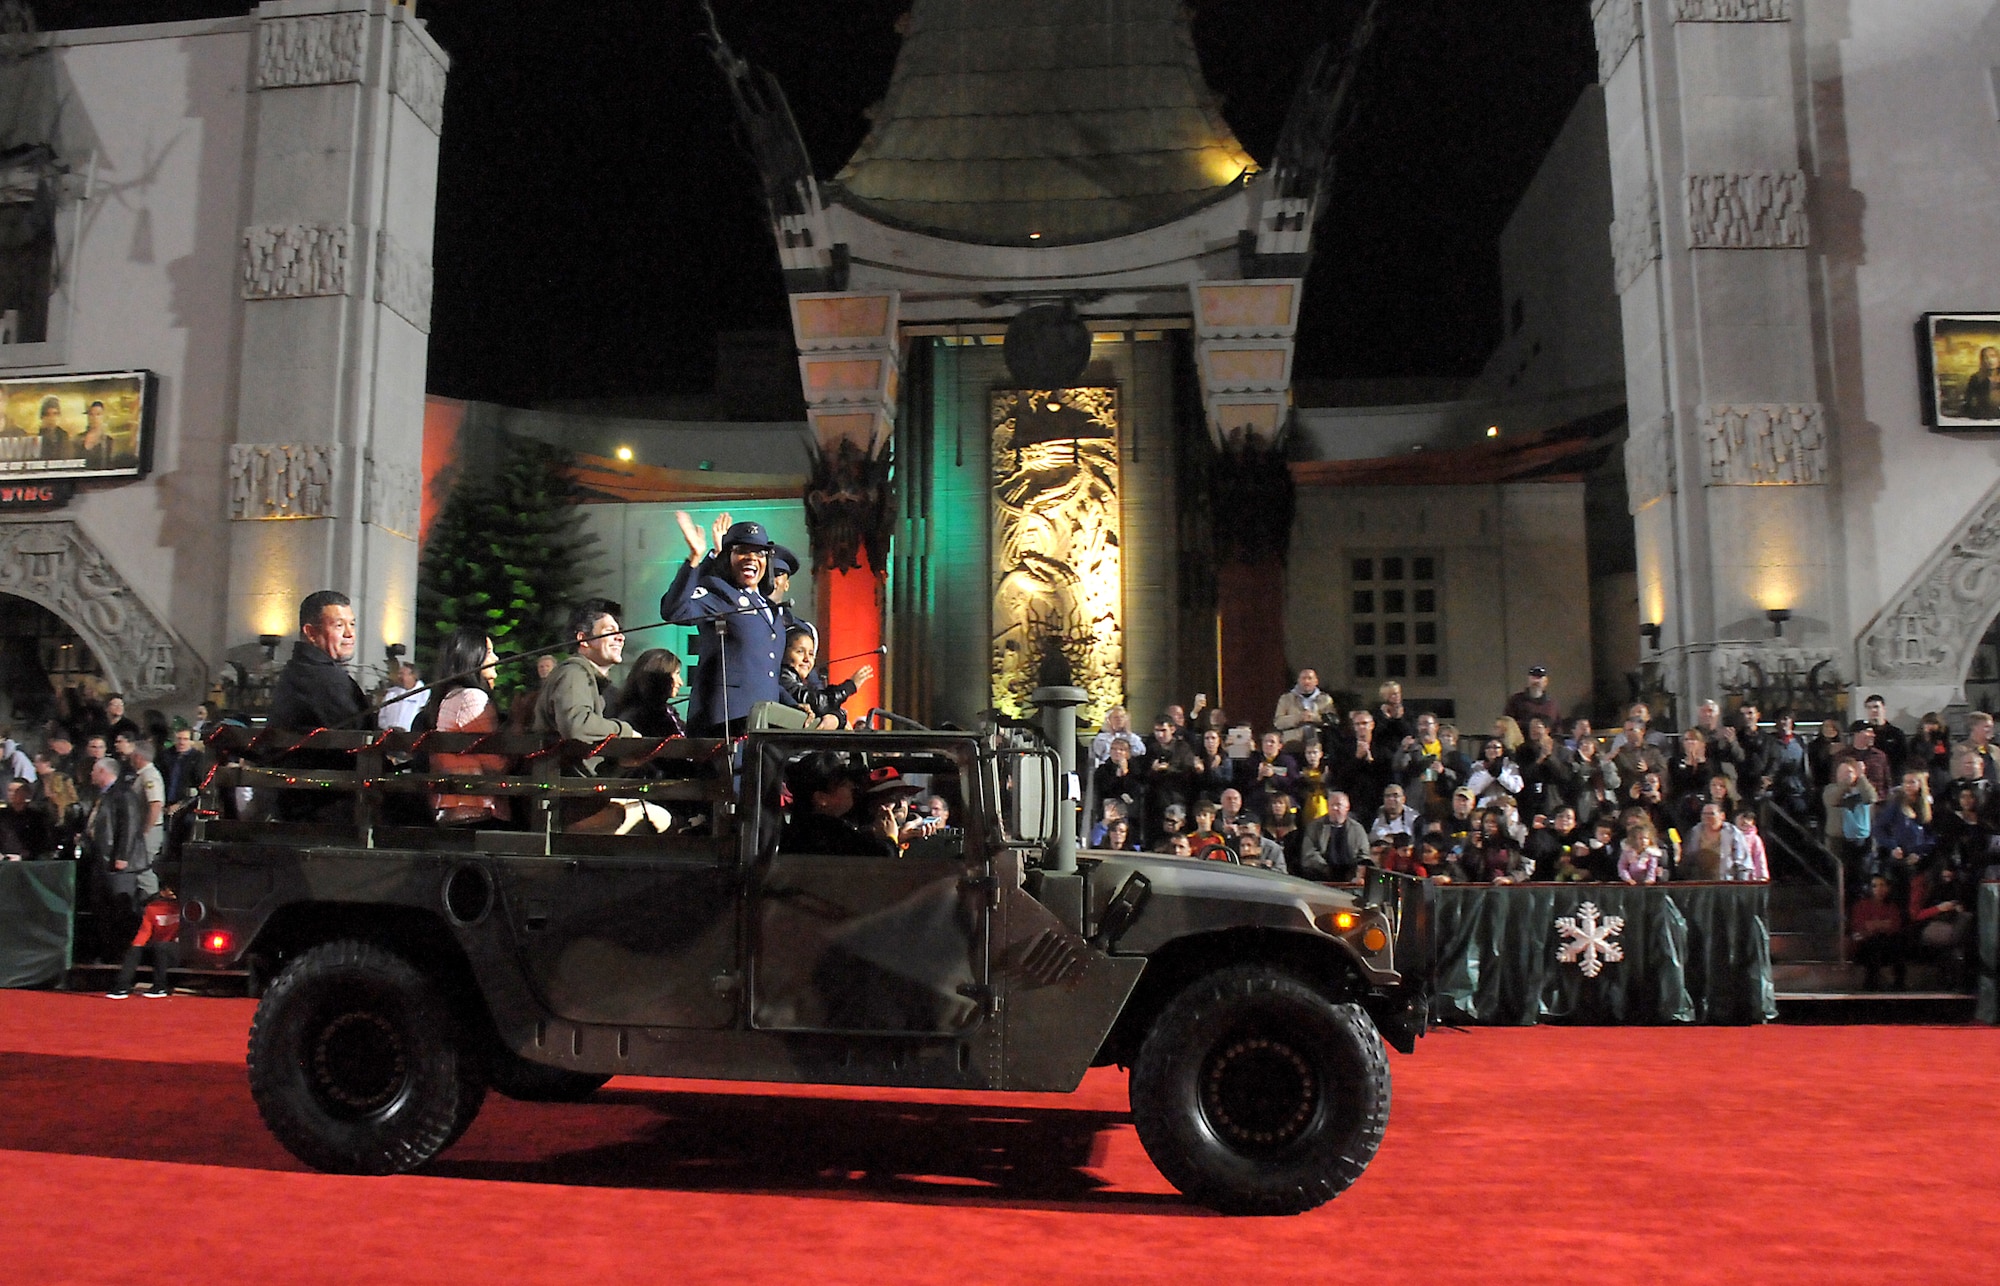 SMC Command Chief Master Sergeant Carol Dockery is joined by other Air Force members and children from Children’s Hospital Los Angeles riding on the red carpet during the Hollywood Christmas Parade, Nov. 25.  (Photo by Joe Juarez)